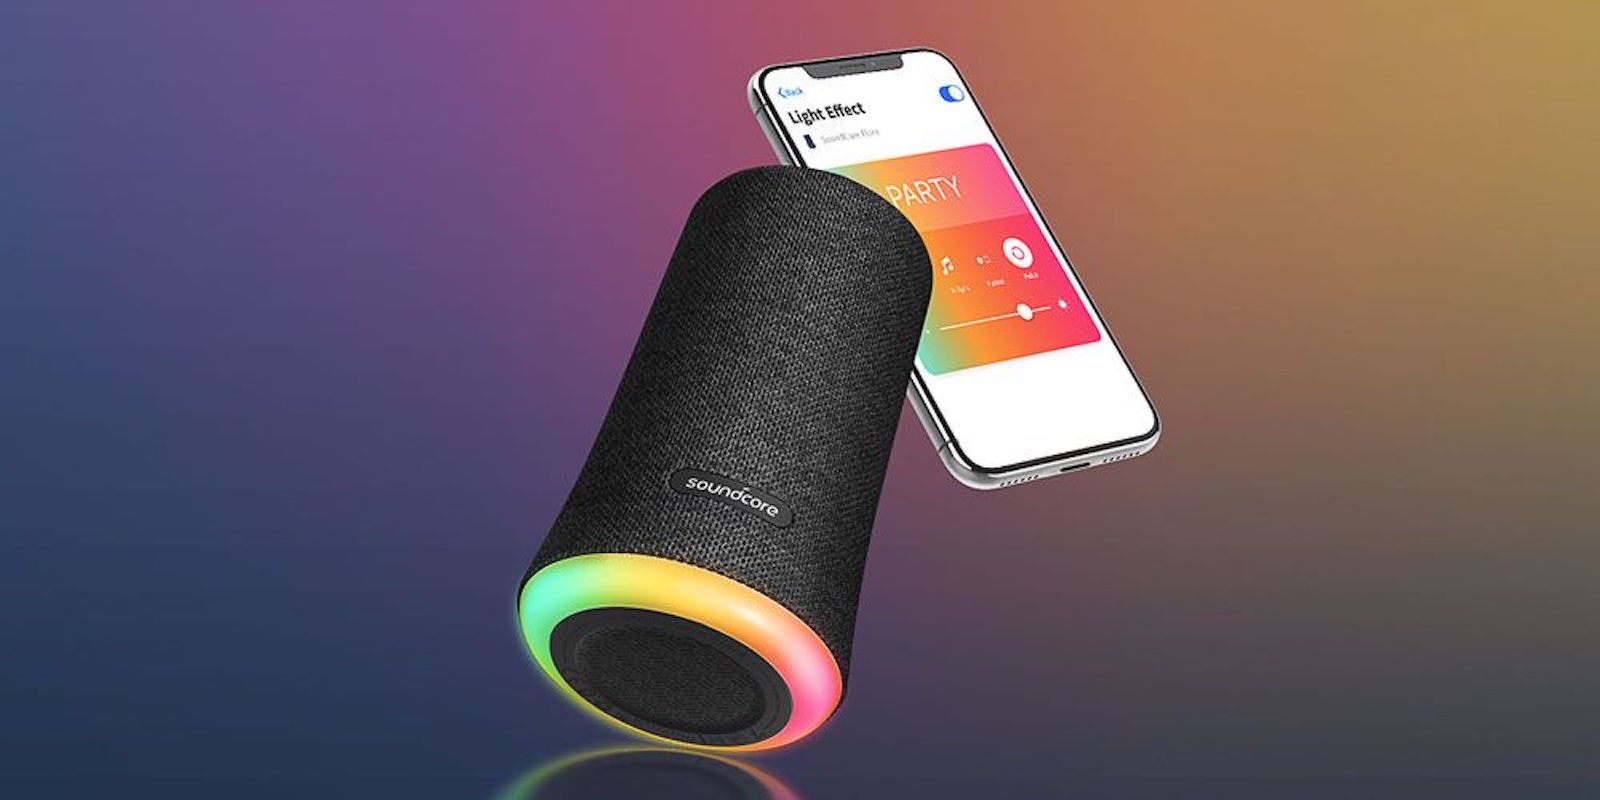 This Bluetooth speaker lets you set the mood with full sound and adaptable light.